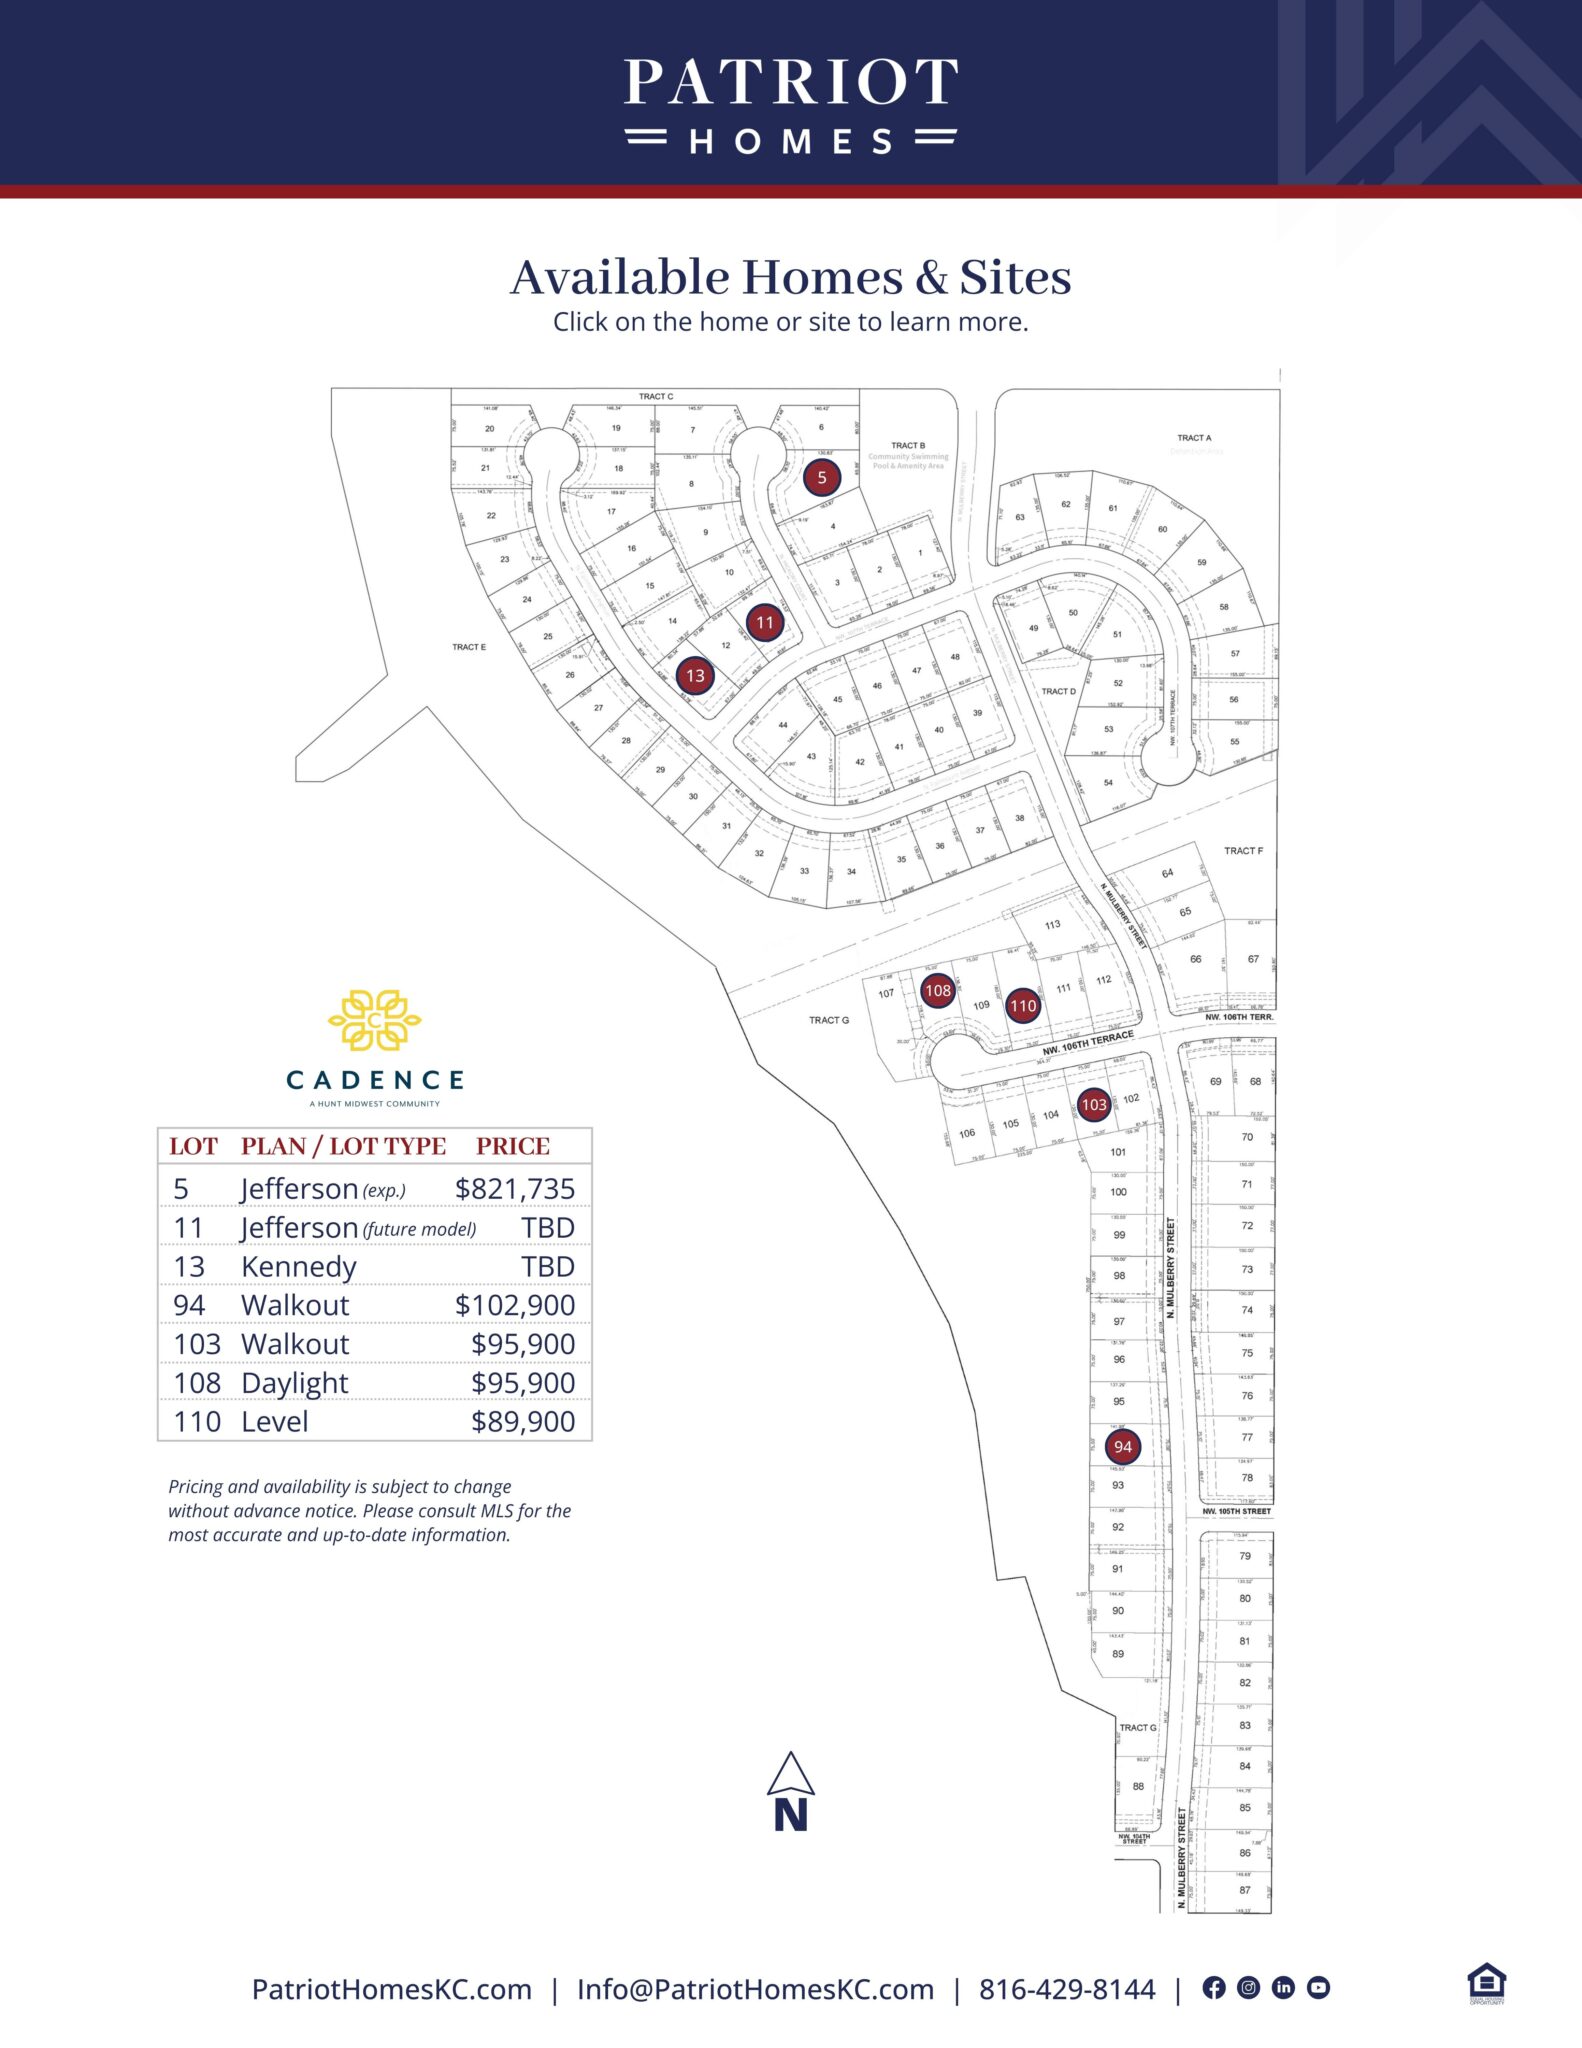 Available homes homesites lots in Cadence new home community.